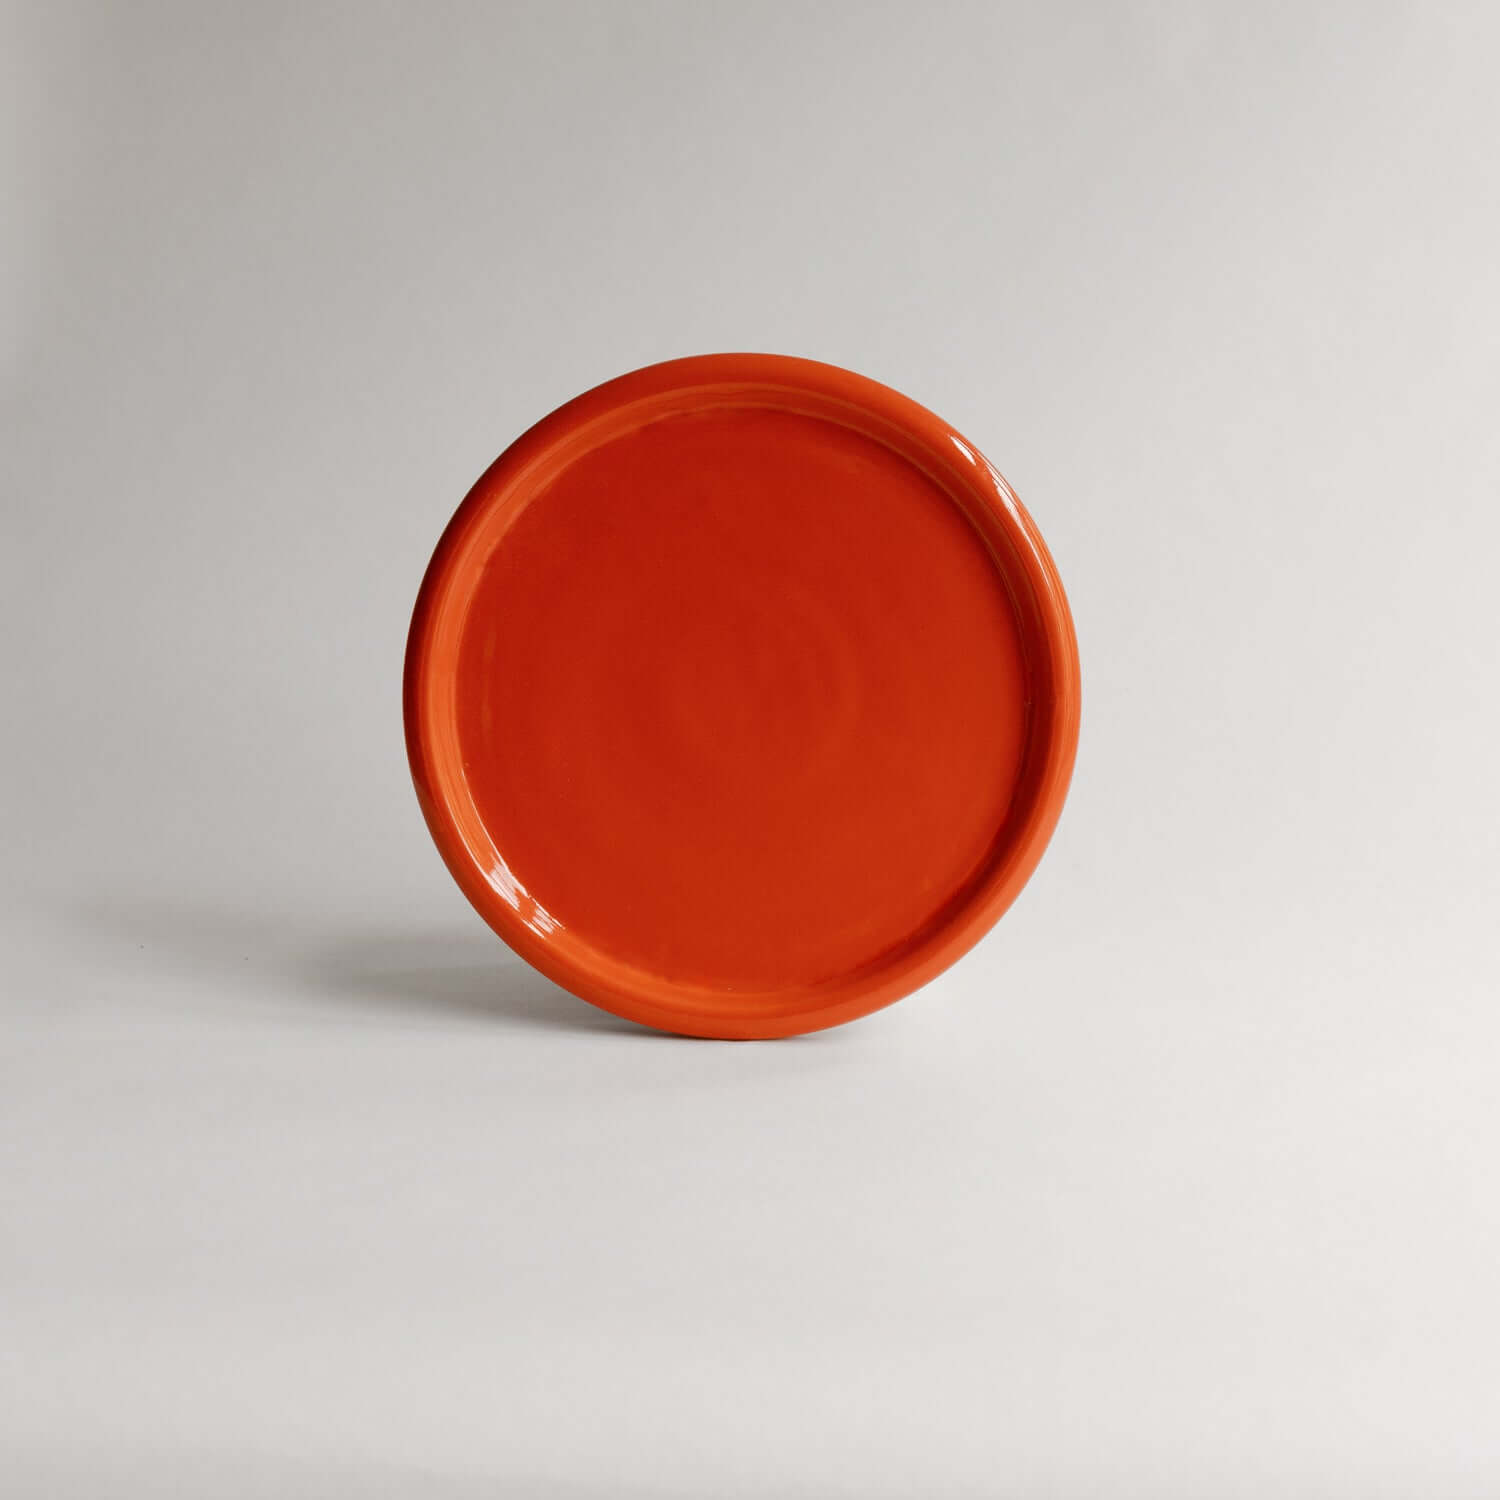 Explore the Plate Aleah Red, 19cm of artisanal charm in grey stoneware with a vibrant red finish. Embrace the uniqueness of handmade. von viola beuscher ceramics